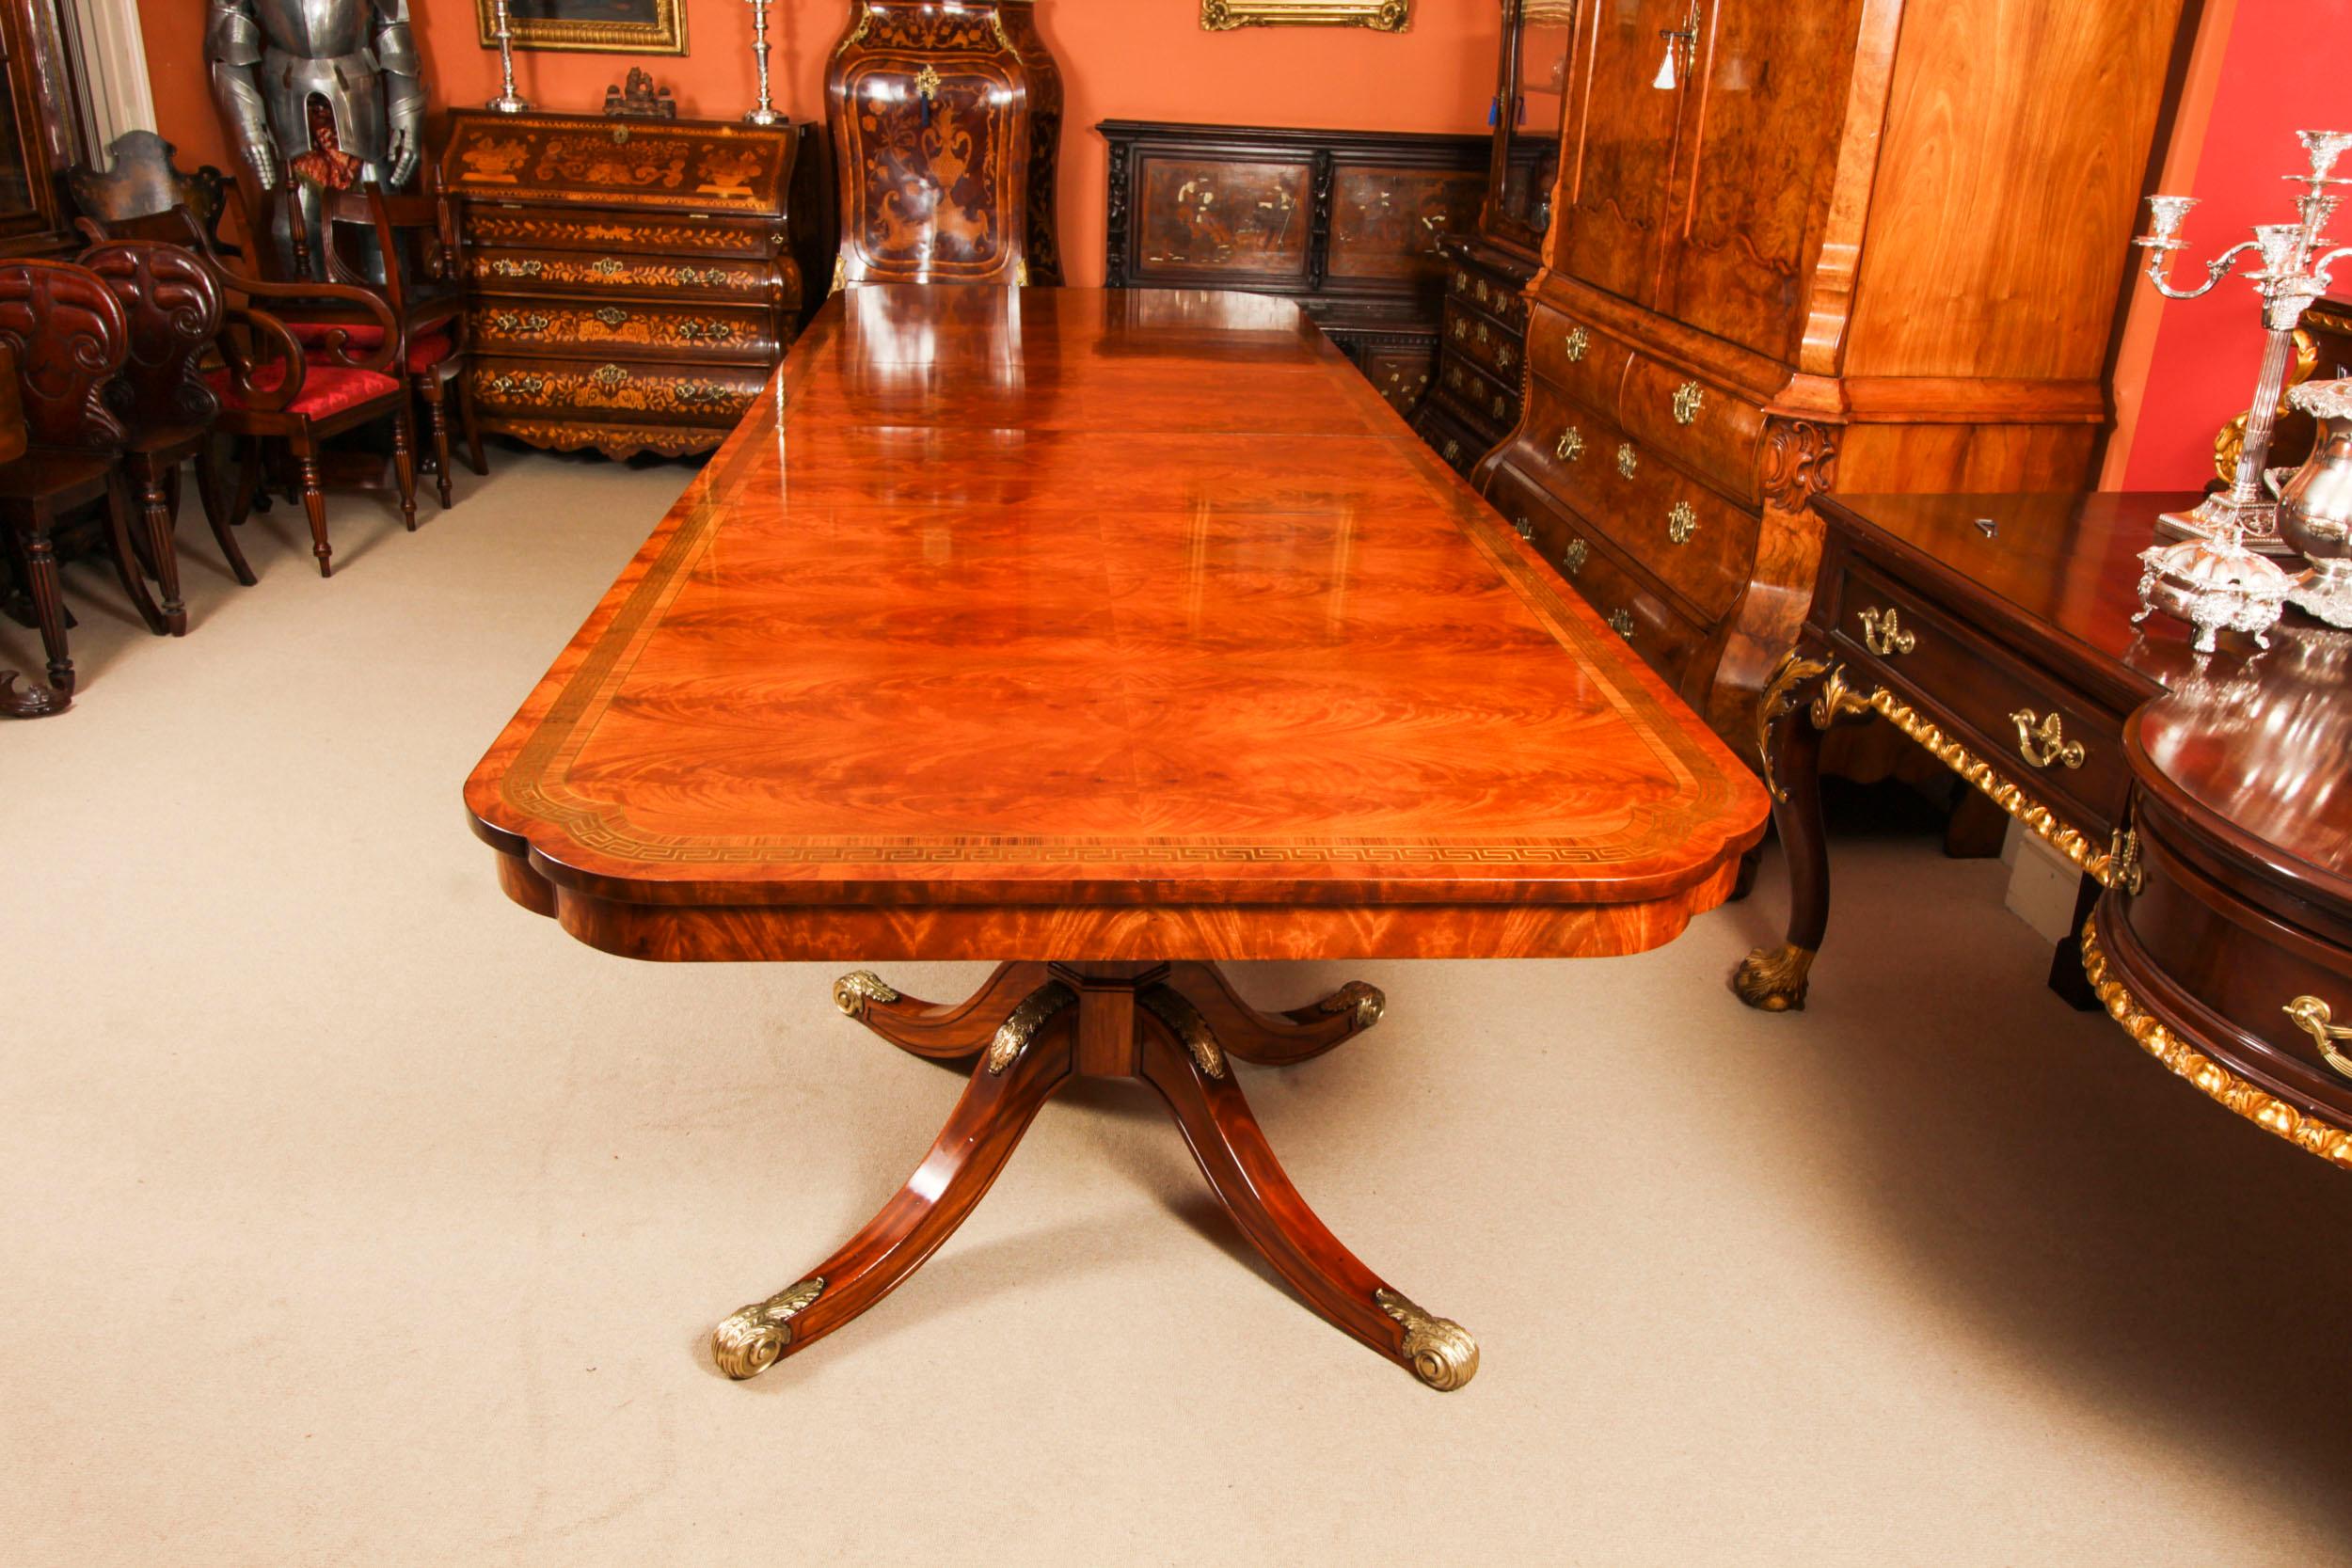 English Vintage Brass Inlaid Dining Table 20th C & 14 Antique Athenian Chairs 19th C For Sale